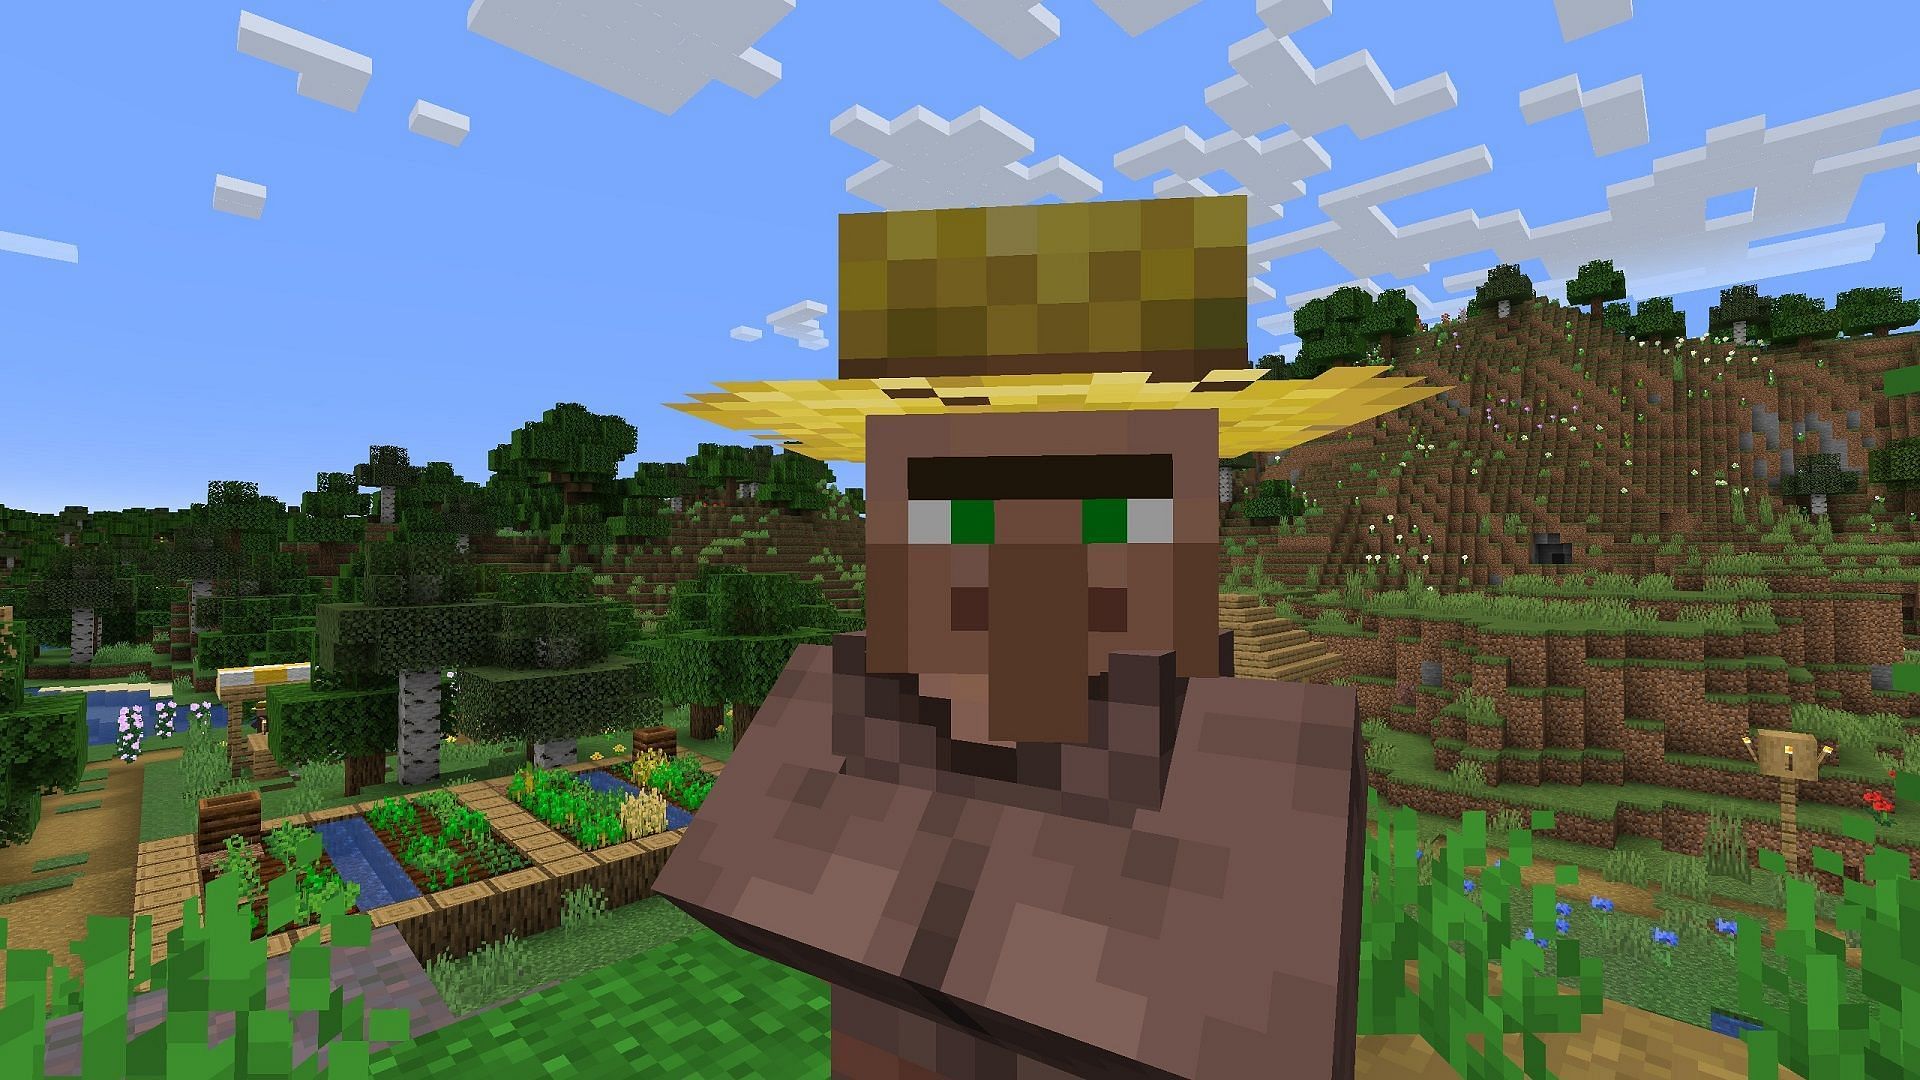 Villager trading can lead to fast XP gains in Minecraft if used wisely (Image via Mojang)